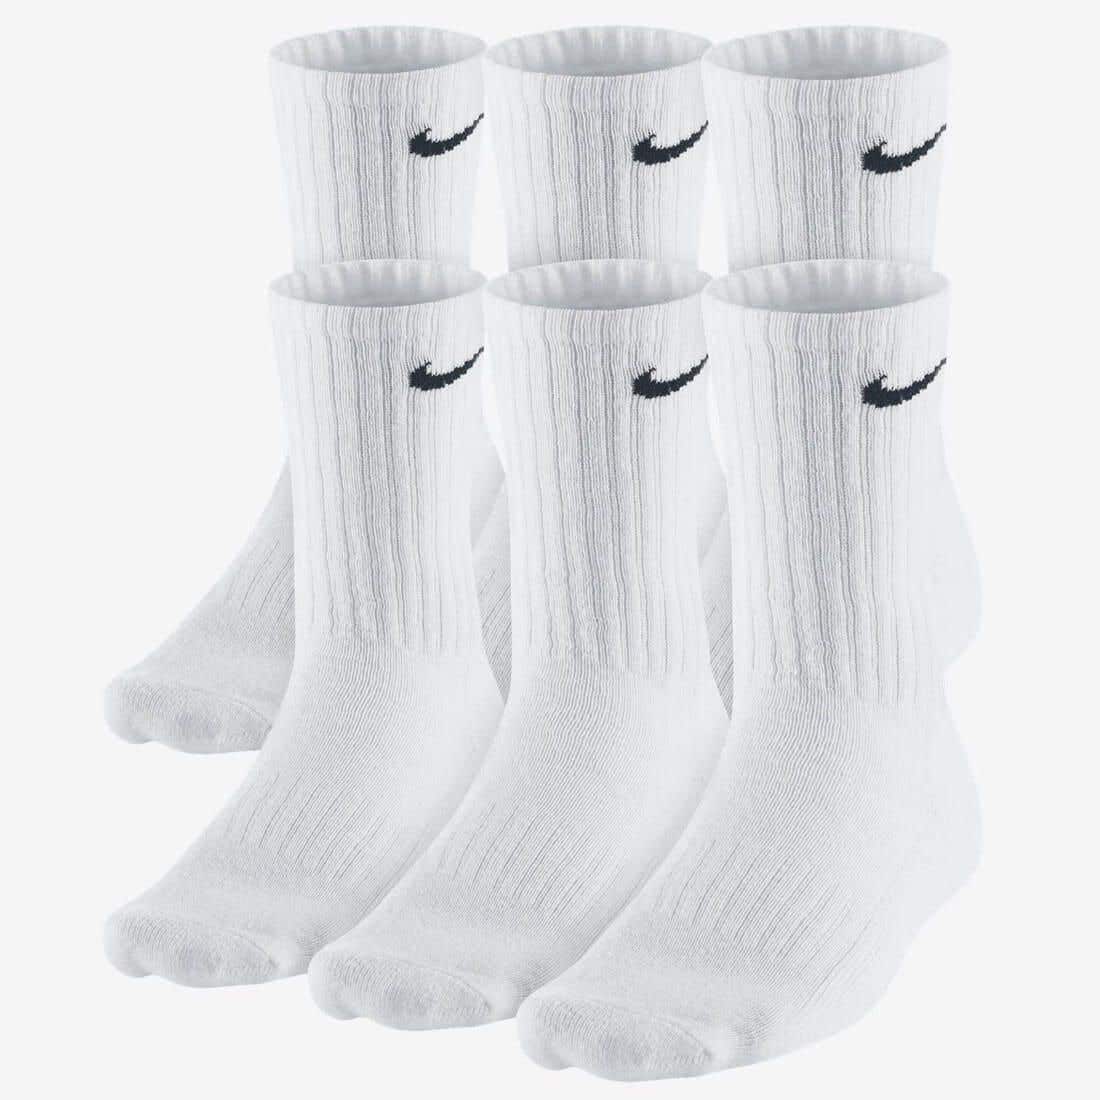 Crew Cotton Socks - 6 Pack | Unlimited